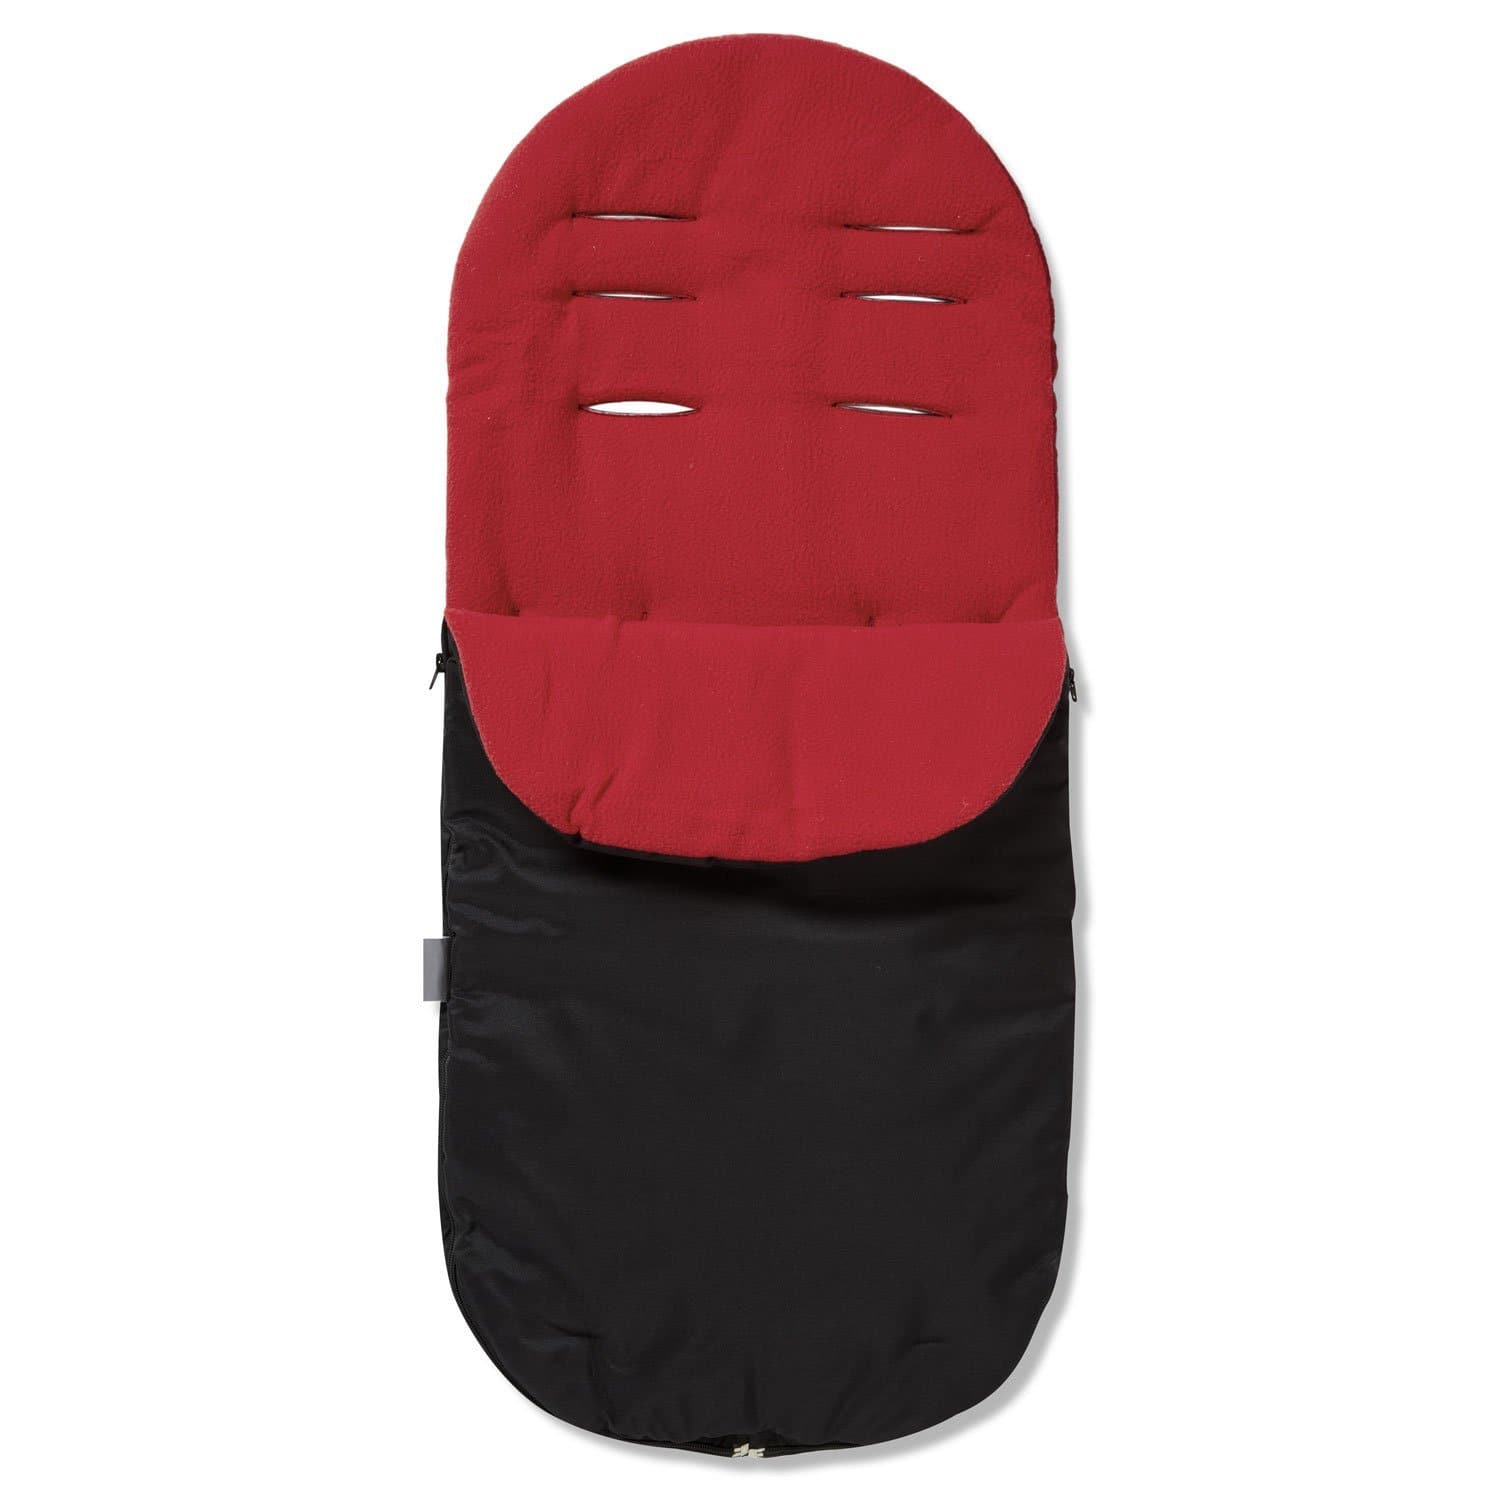 Footmuff / Cosy Toes Compatible with Graco - Red / Fits All Models | For Your Little One